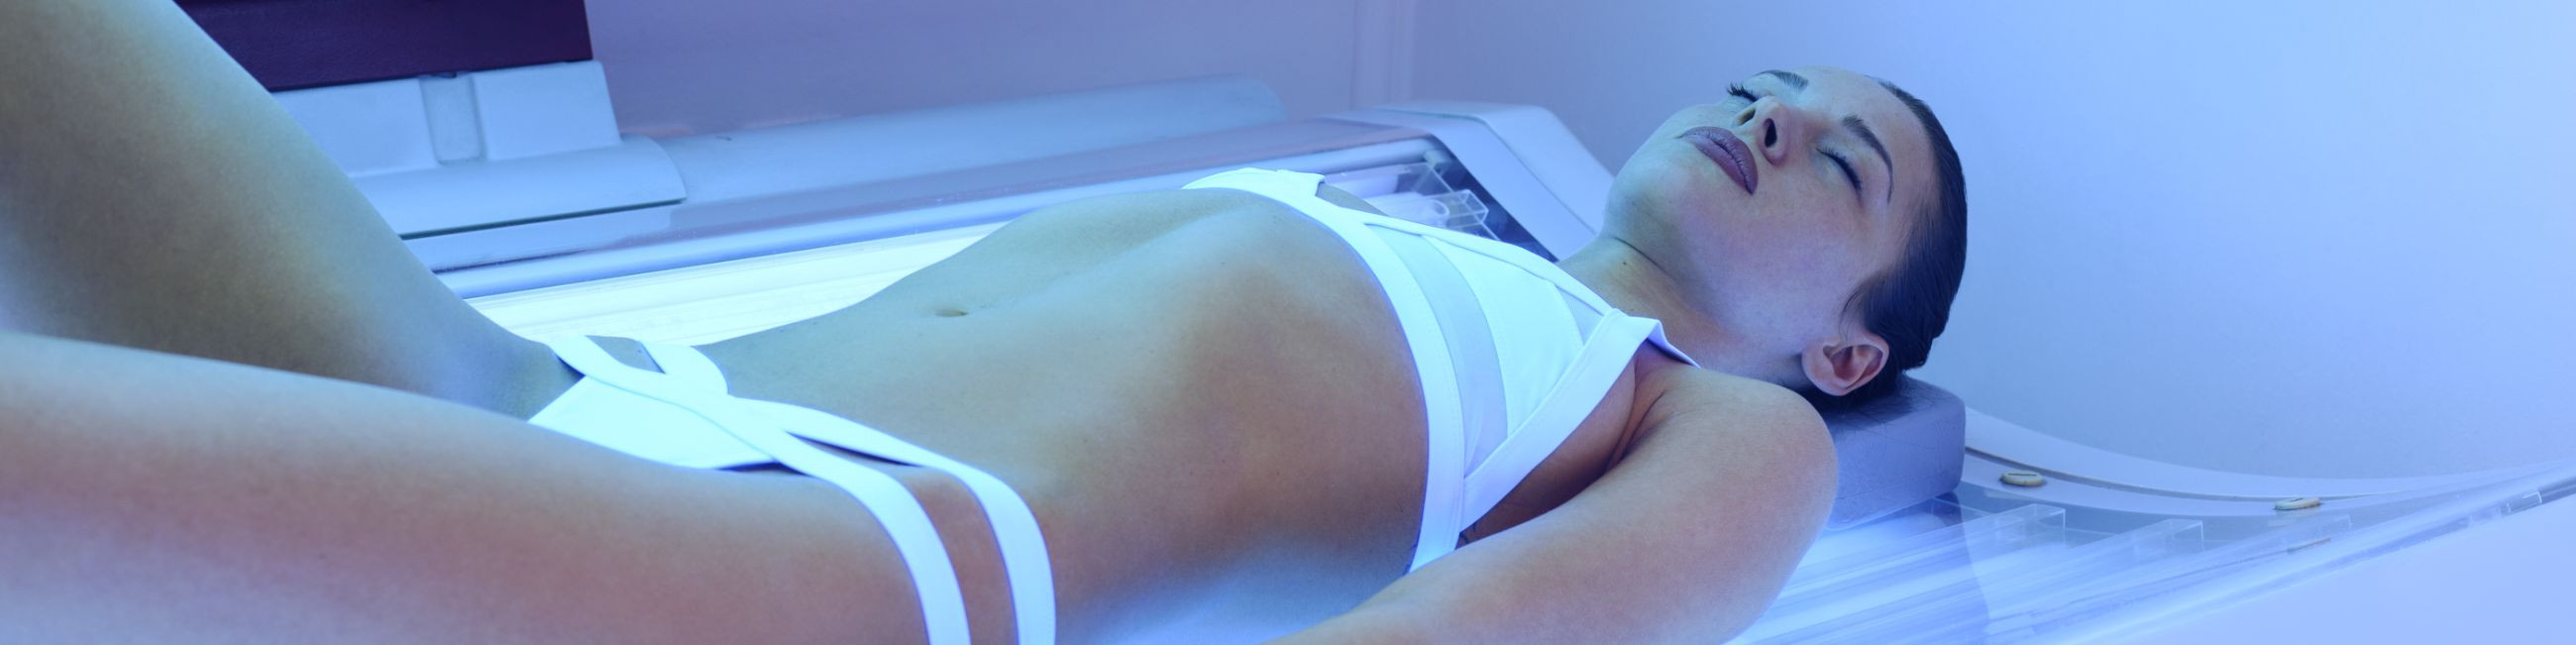 solarium, d - tan, quick tan, spray-tan, roller massage, beauty services, spray tanning, manicure with gel varnish, self tanners